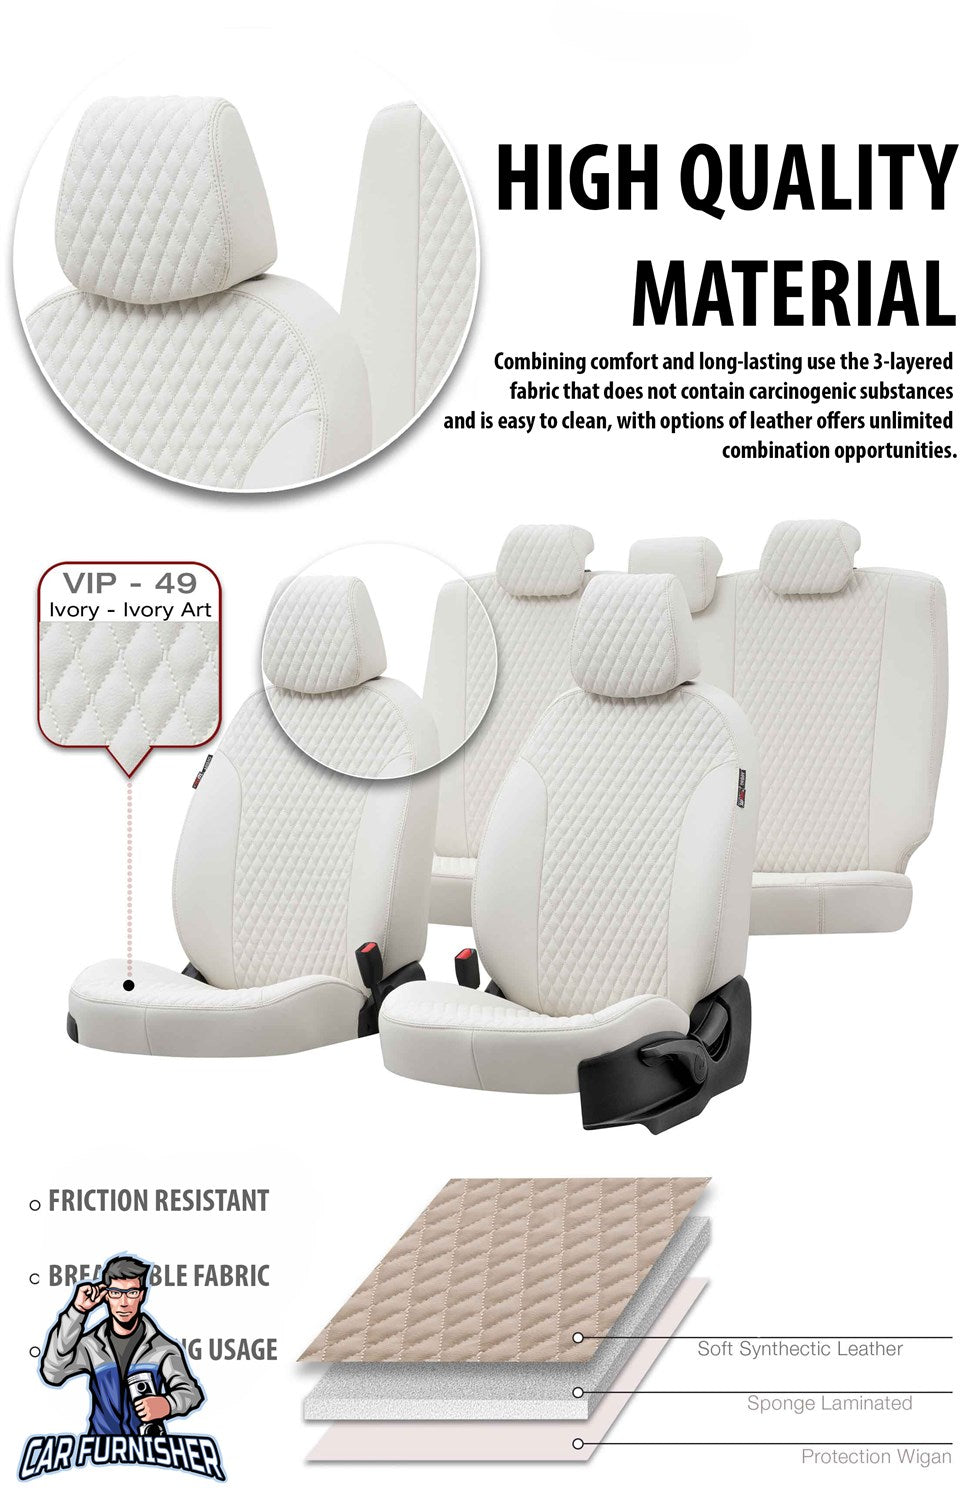 Mitsubishi Outlander Seat Covers Amsterdam Leather Design Ivory Leather